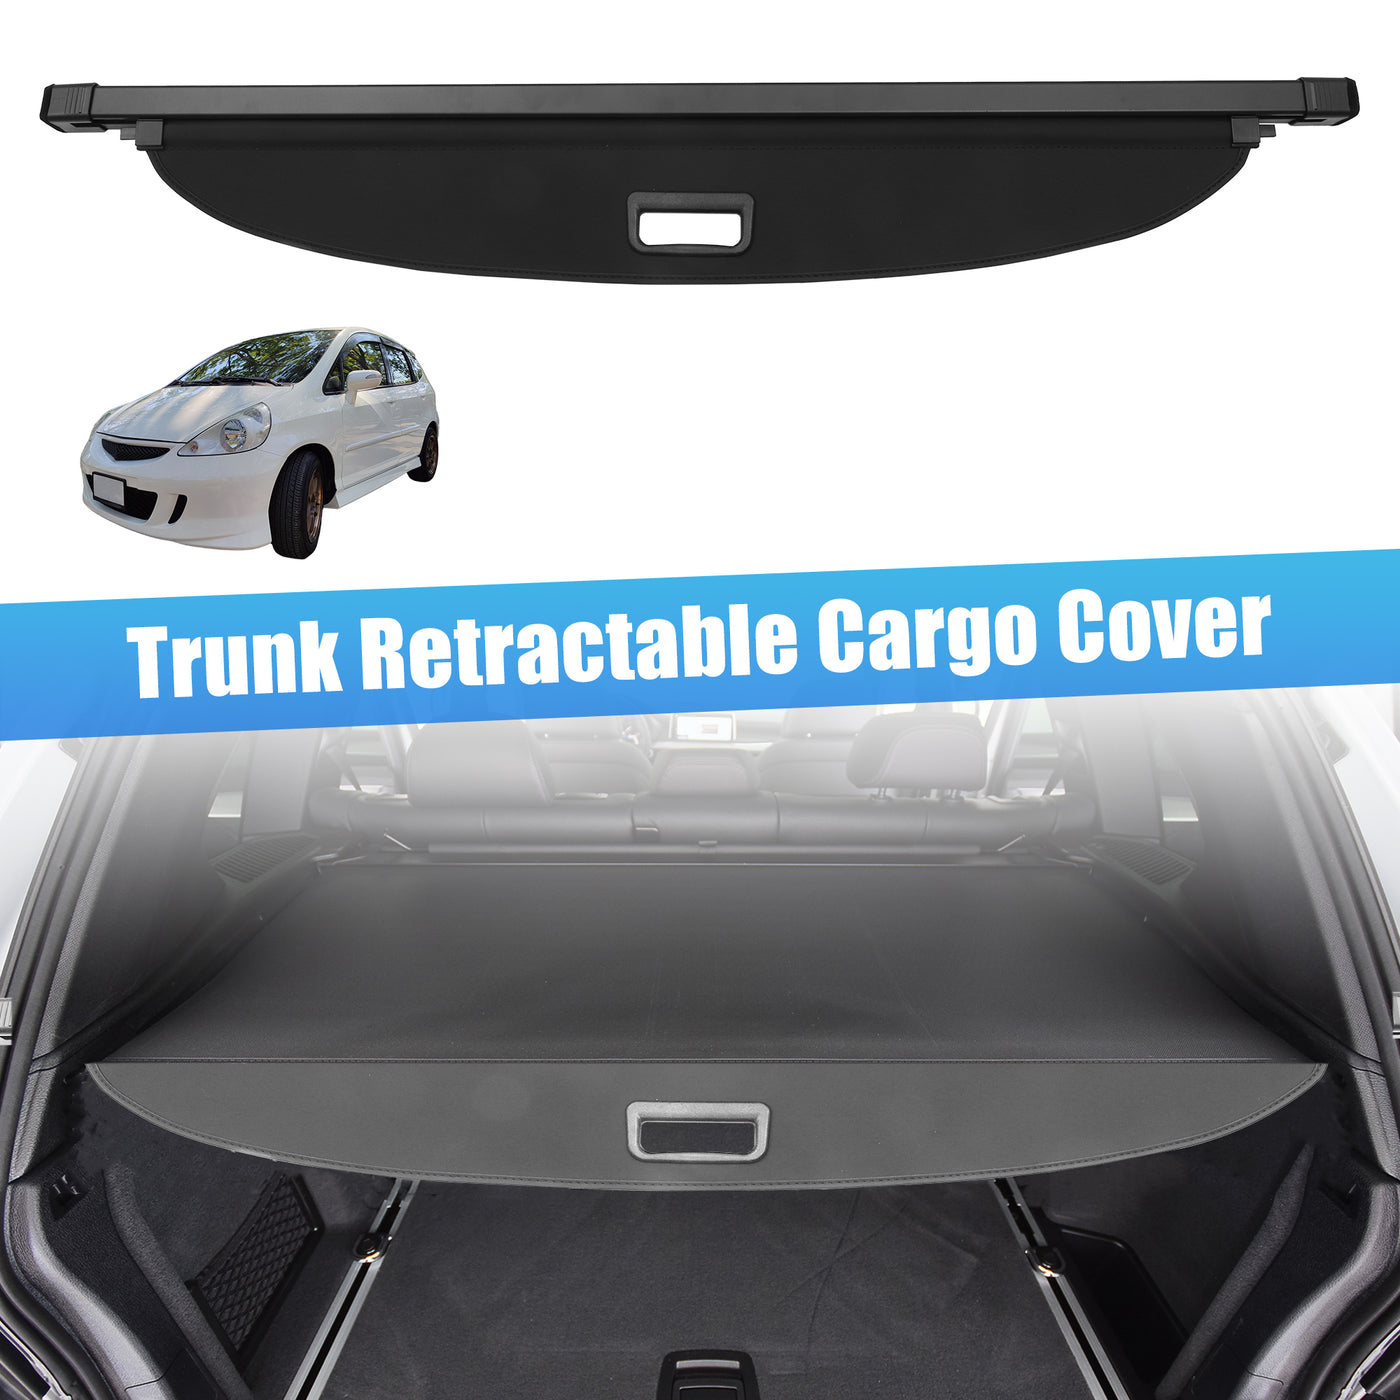 ACROPIX Retractable Cargo Cover Rear Trunk Security Cover Shield Shade Adjustable Fit for Honda Fit 2002-2007 - Pack of 1